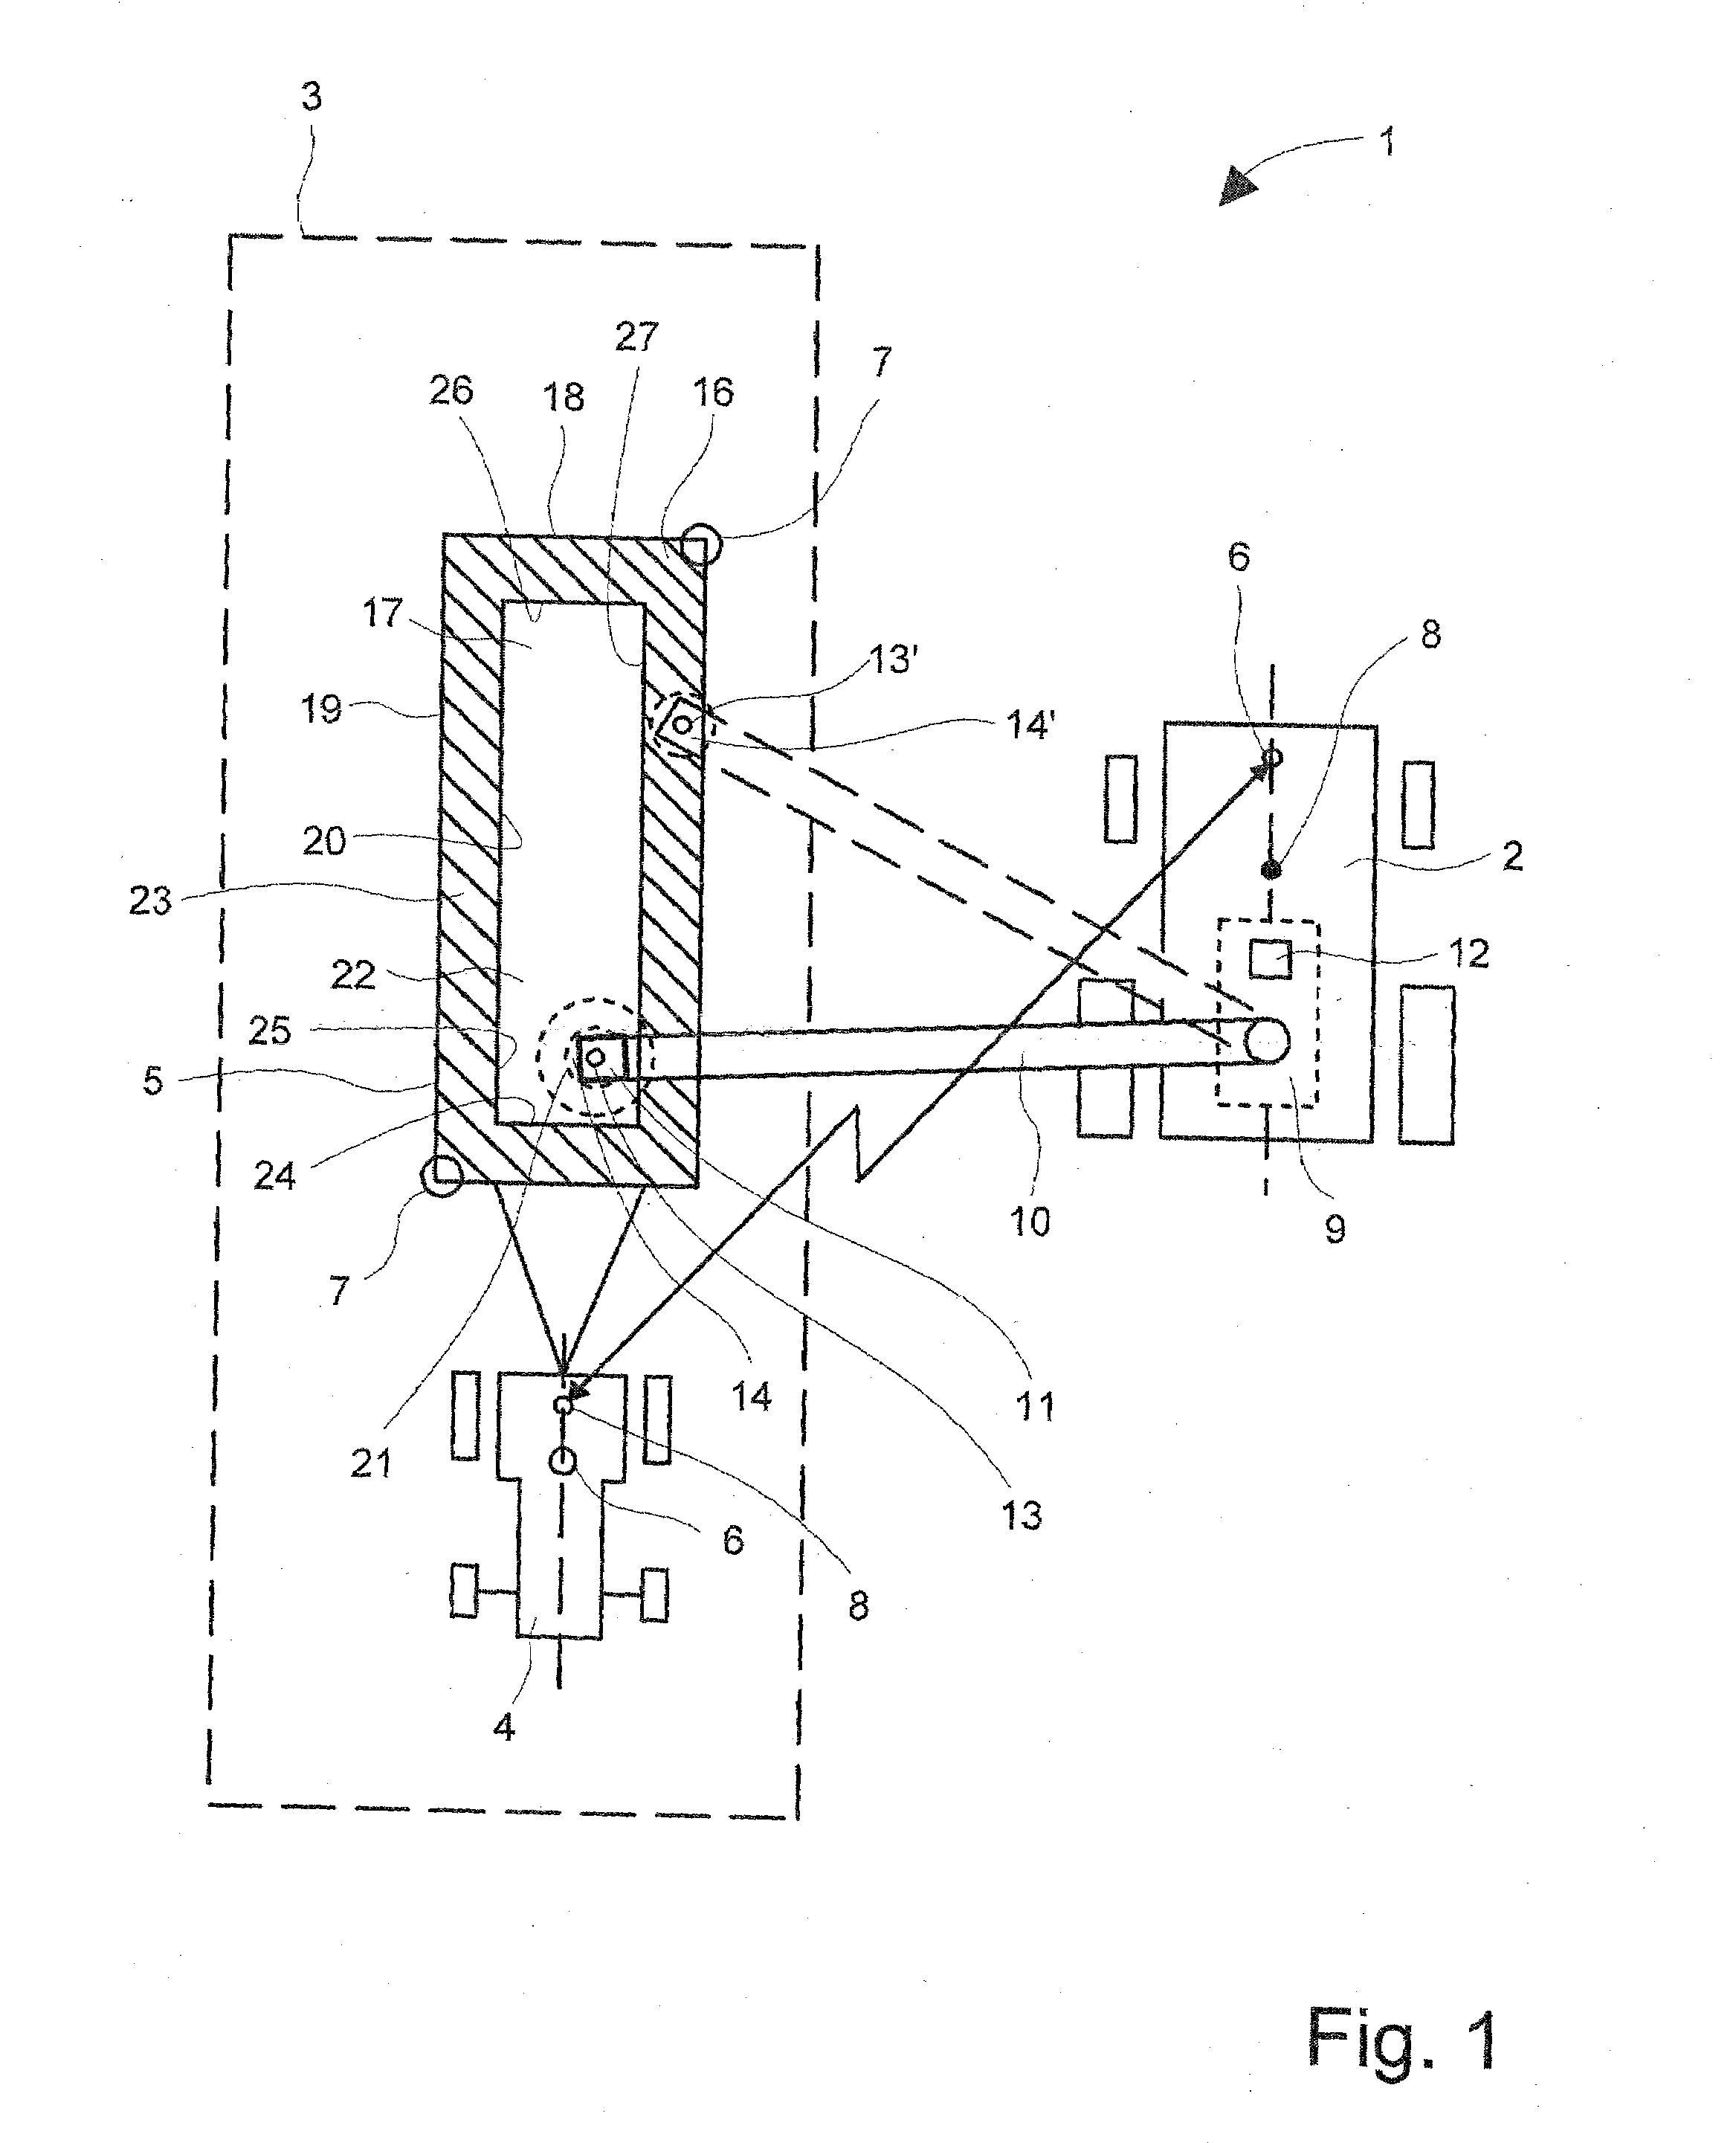 Self-propelled agricultural harvesting machine with controllable transfer device